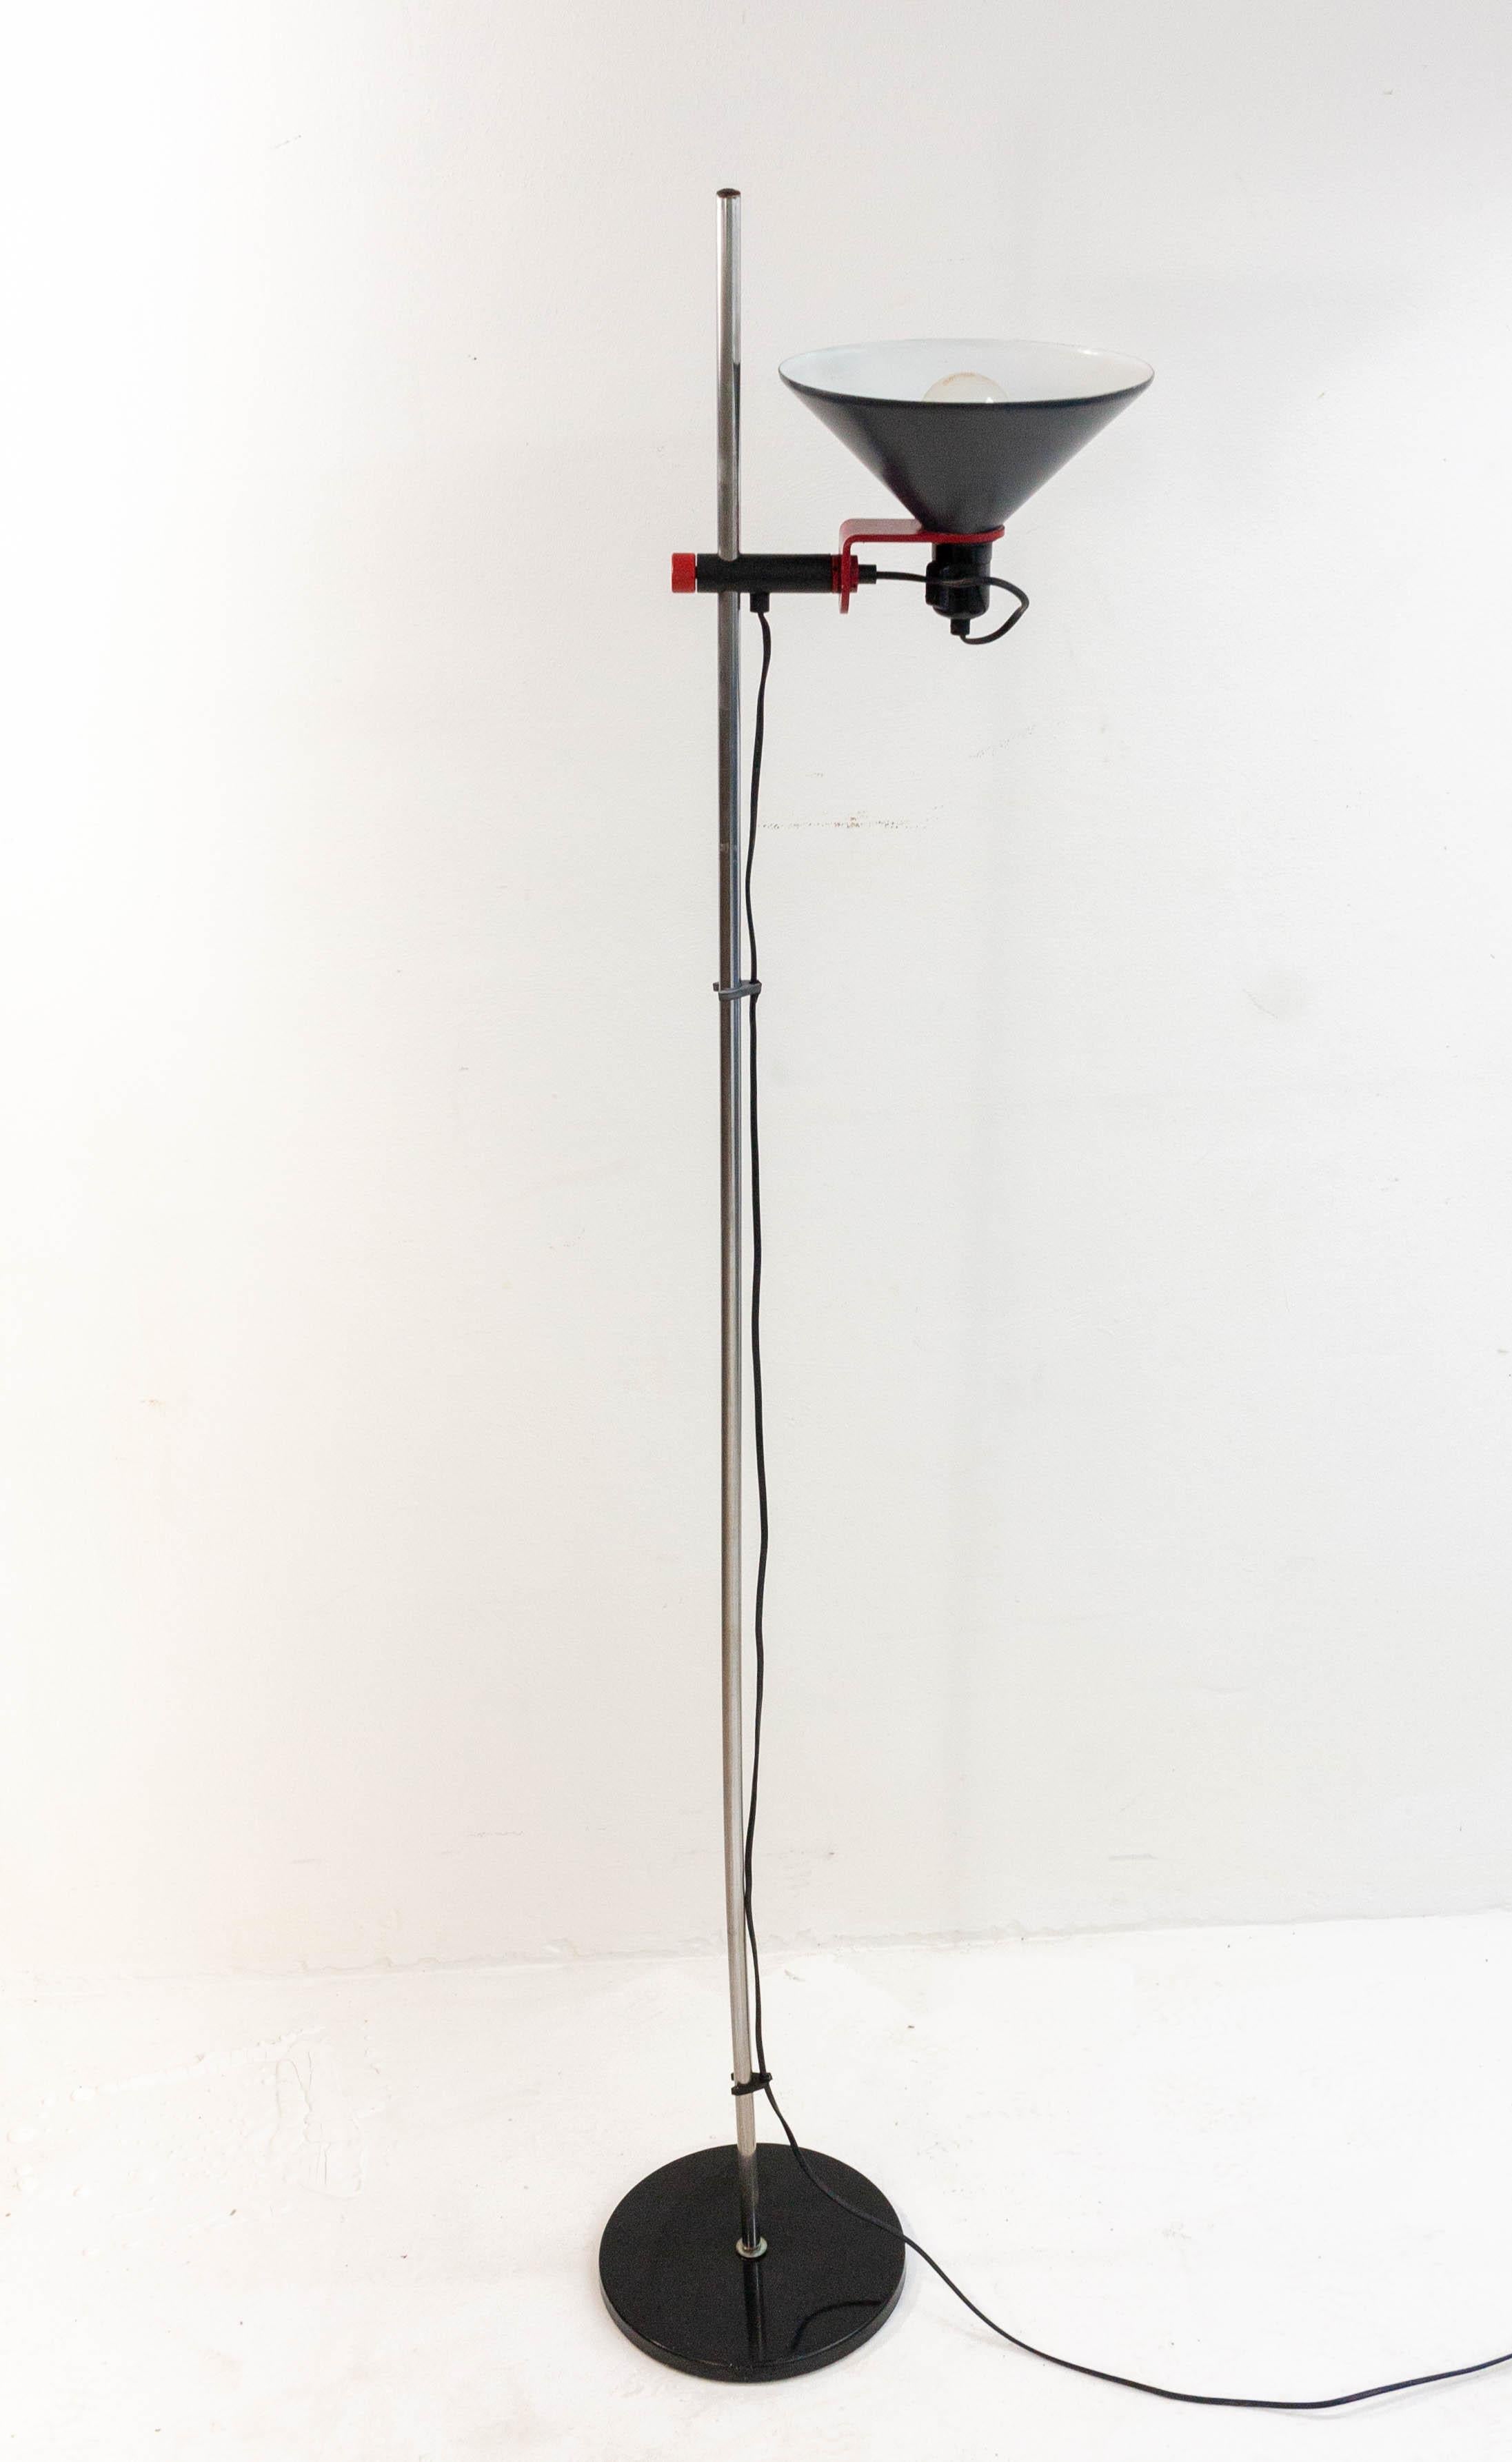 Stylish 1960s Stilnovo floor lamp in red and anthracite. The lamp is height adjustable and rotates along two axes allowing it to be aimed in any desired direction.